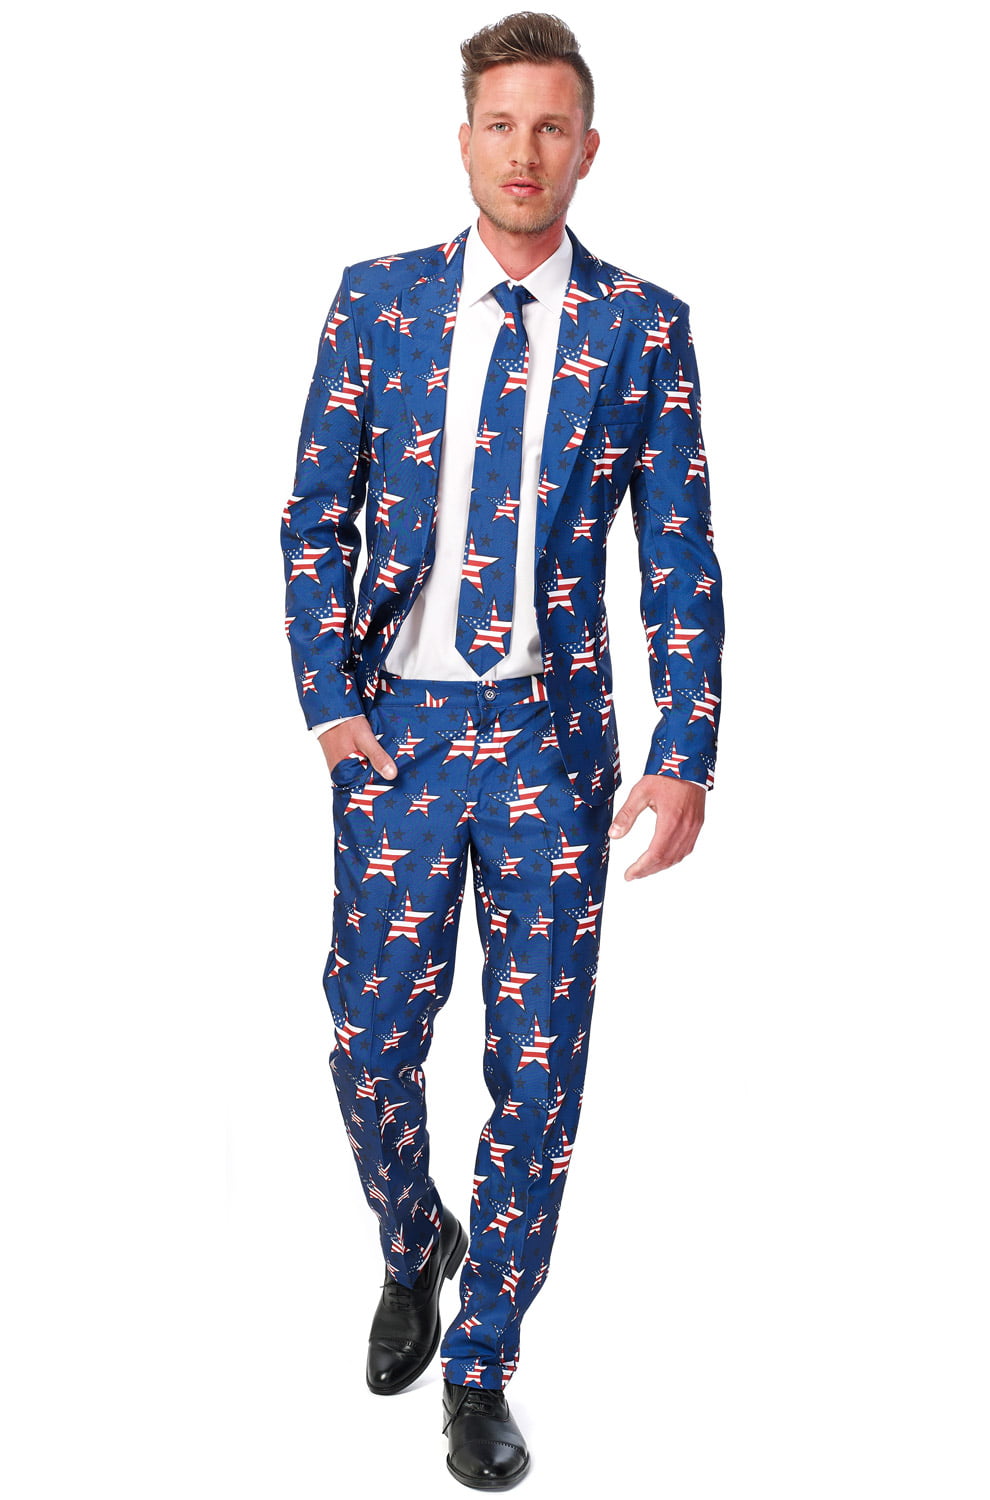 4th of July Outfits for Men 2 Piece Sets USA Flag Star Stripes Patriotic Suits